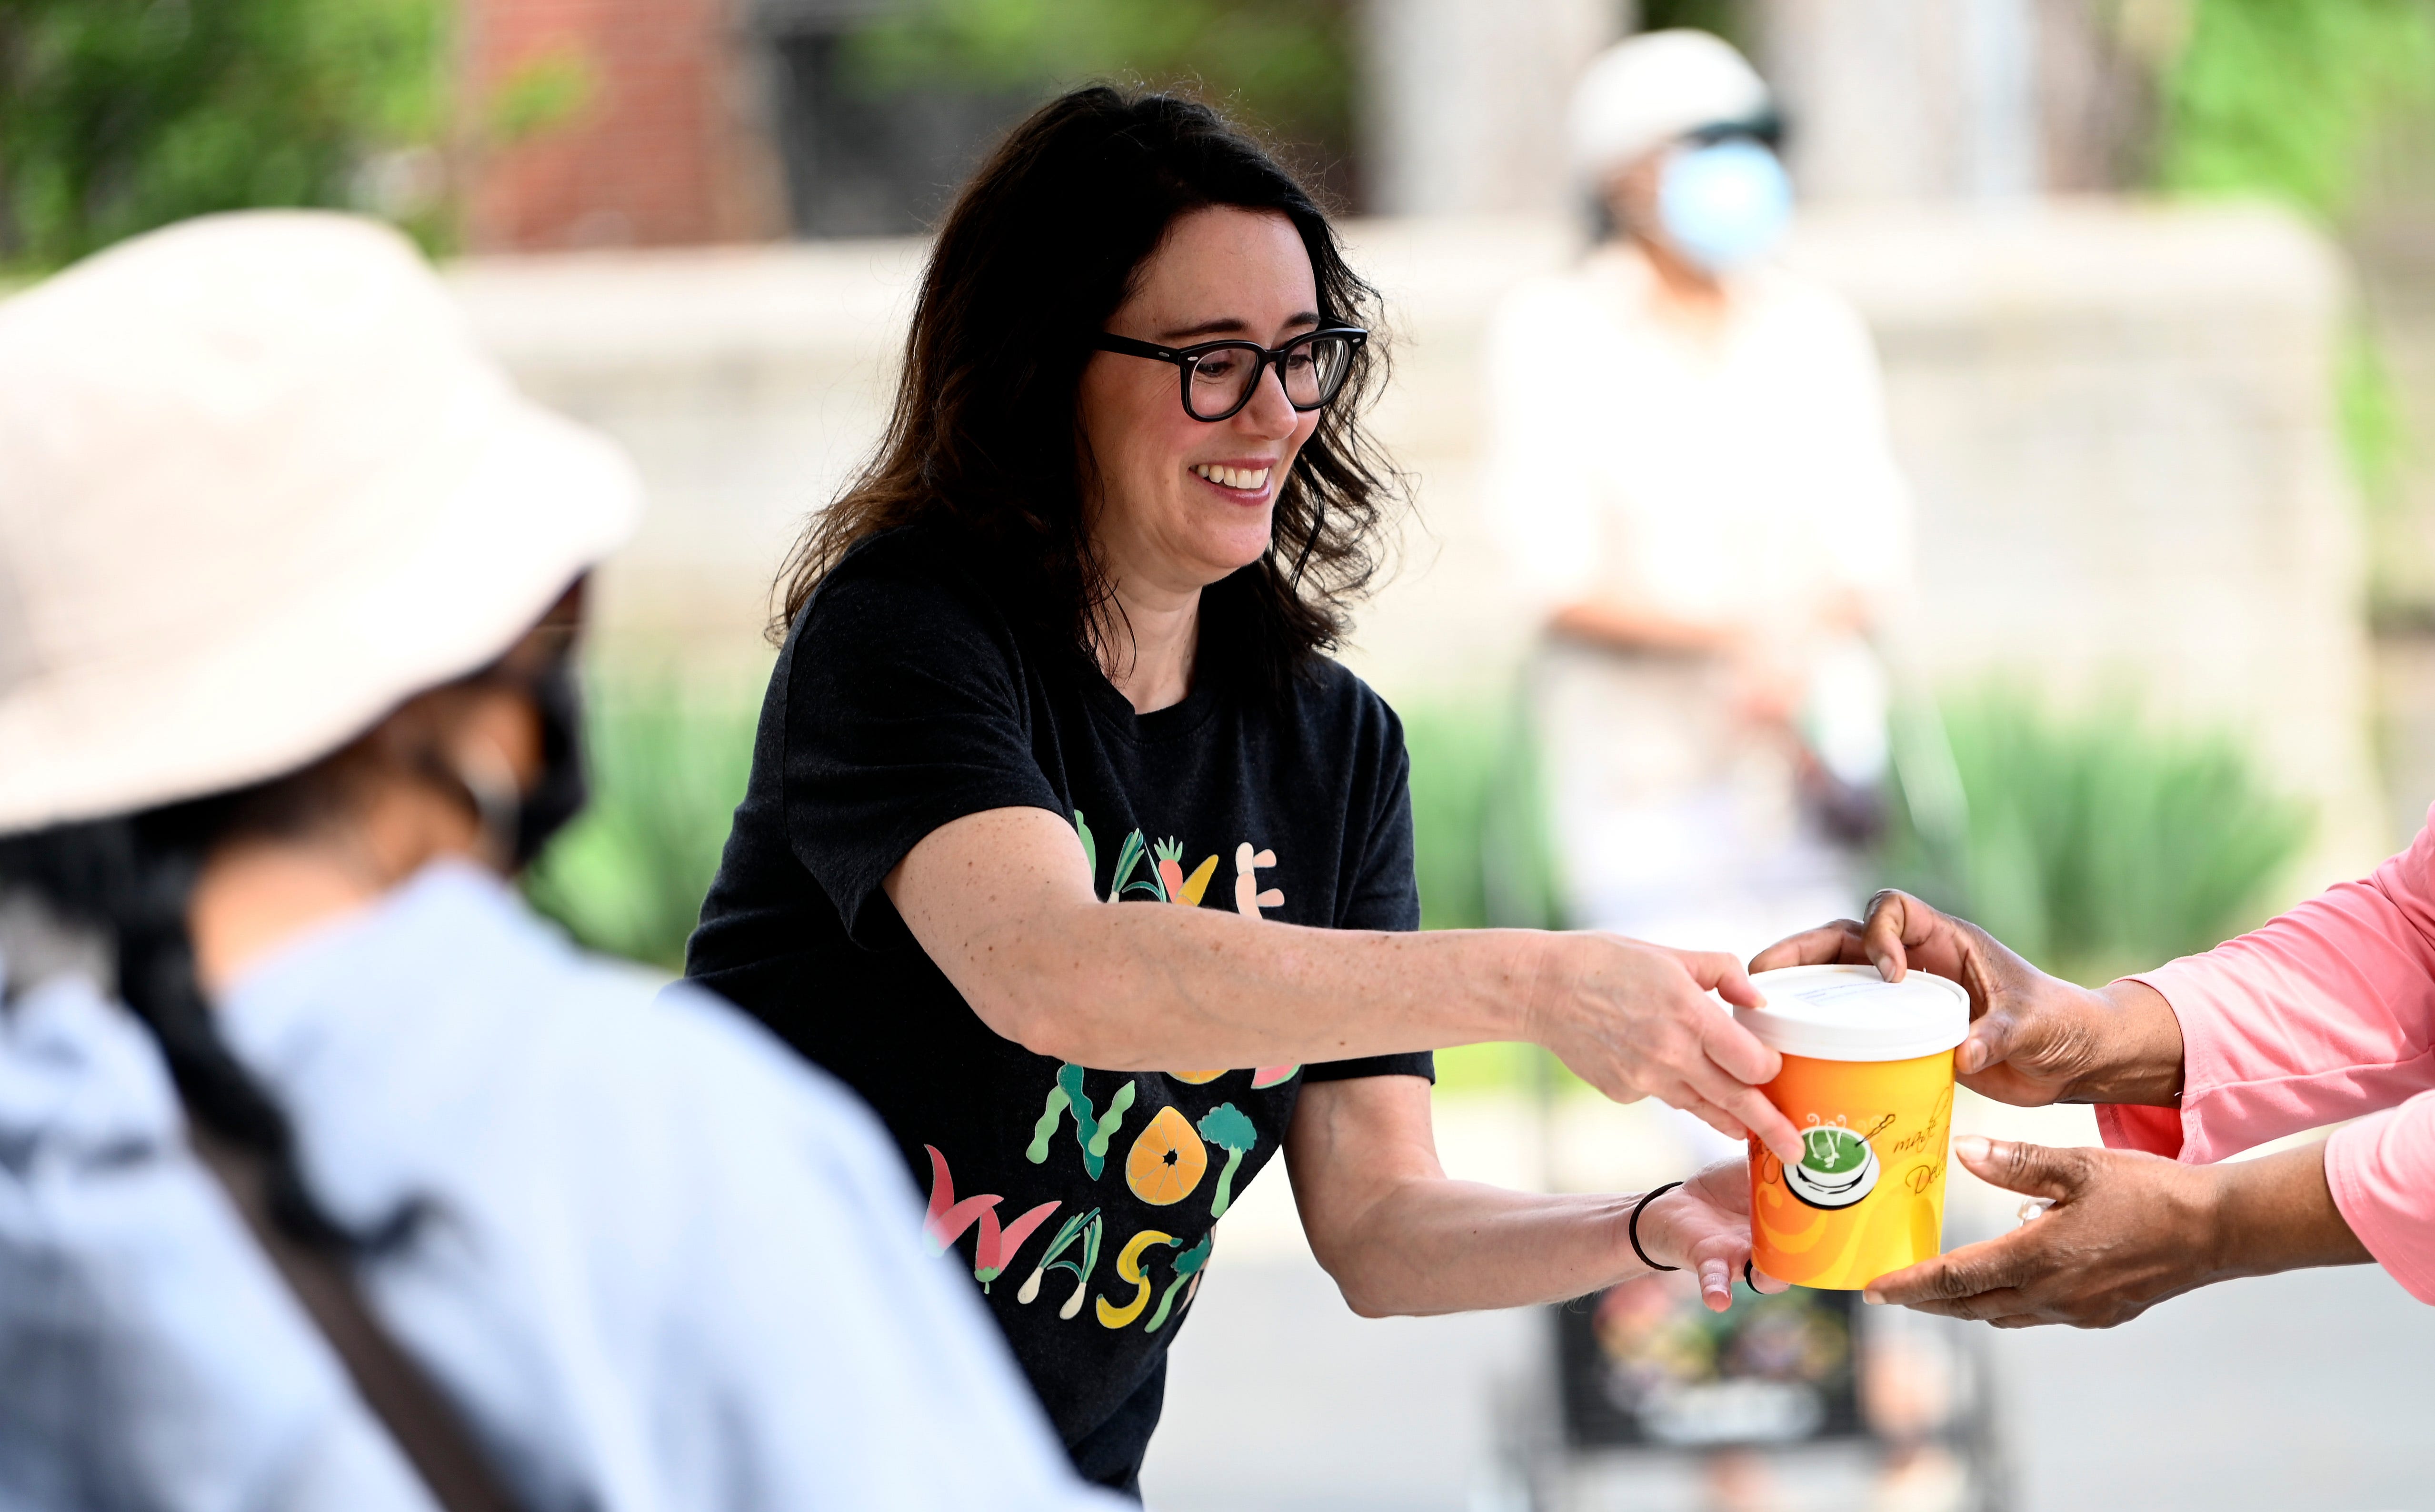 Make Food Not Waste Executive Director Danielle Todd offers soup to members of the community during food distribution in the Jefferson Avenue Presbyterian Church parking lot in Detroit.